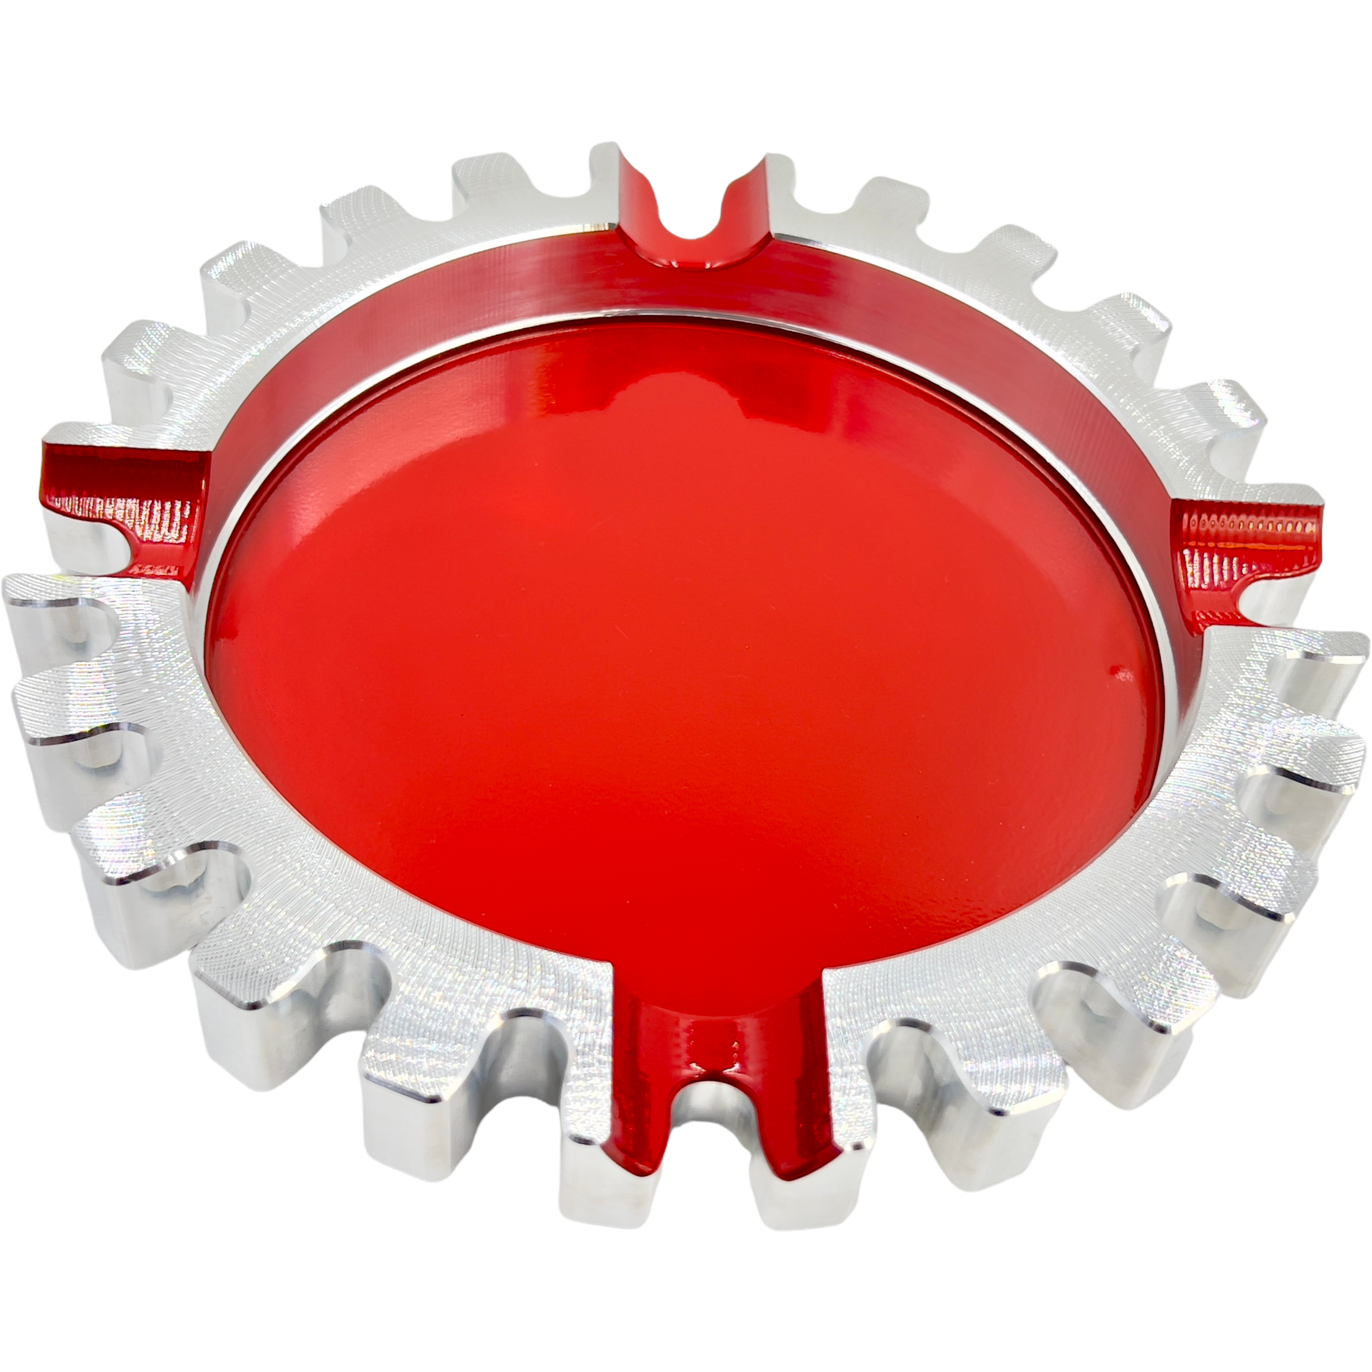 Cigar Ashtray Large Gear-Shaped Four Finger (4 Colors)-The Cigar Ashtray-Wine Whiskey and Smoke